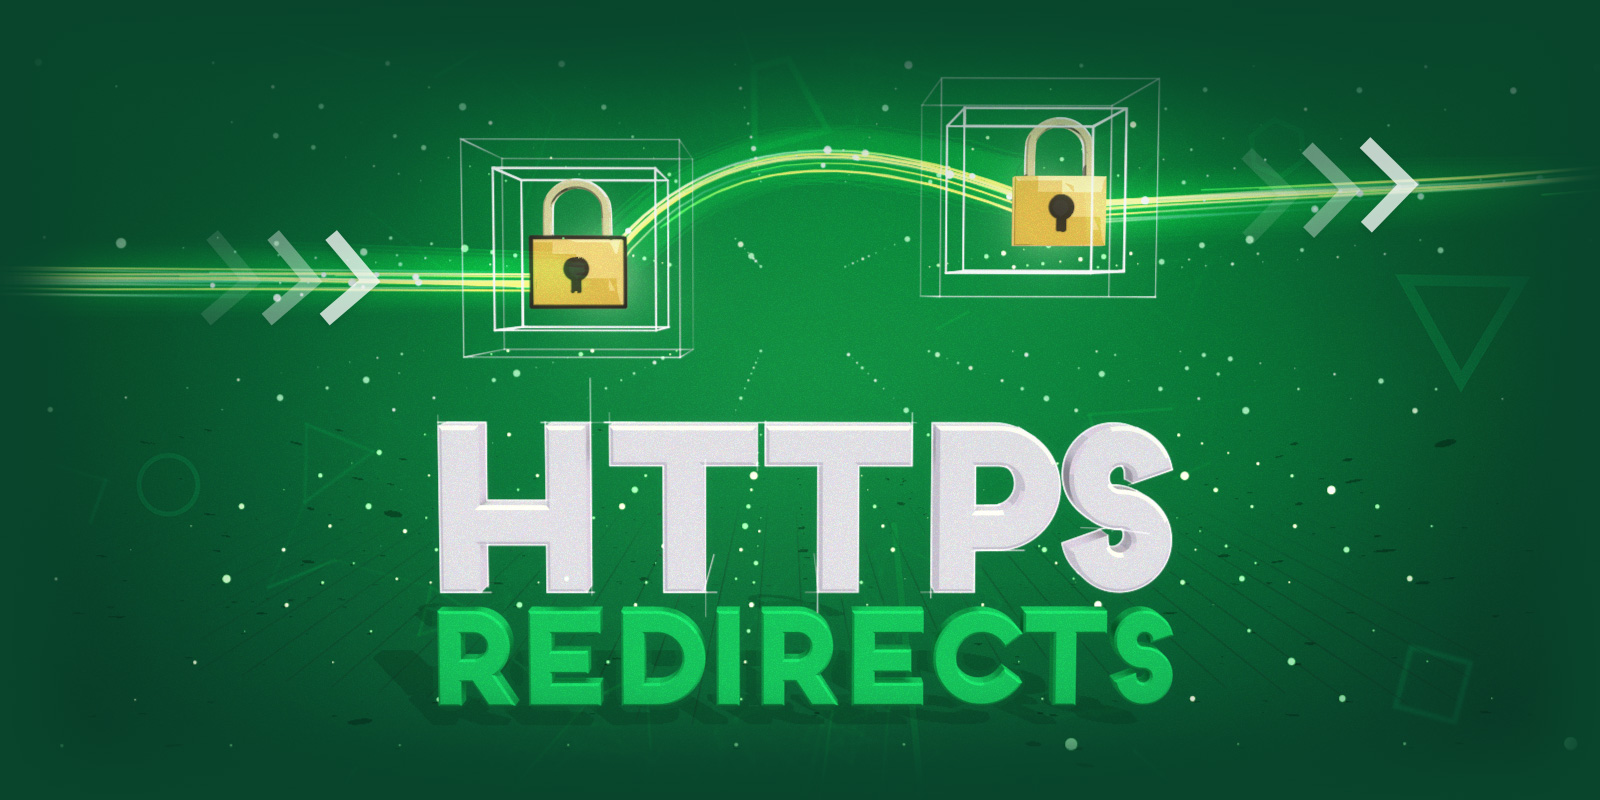 Greater visibility, better security. Get your .dev and use https forwarding